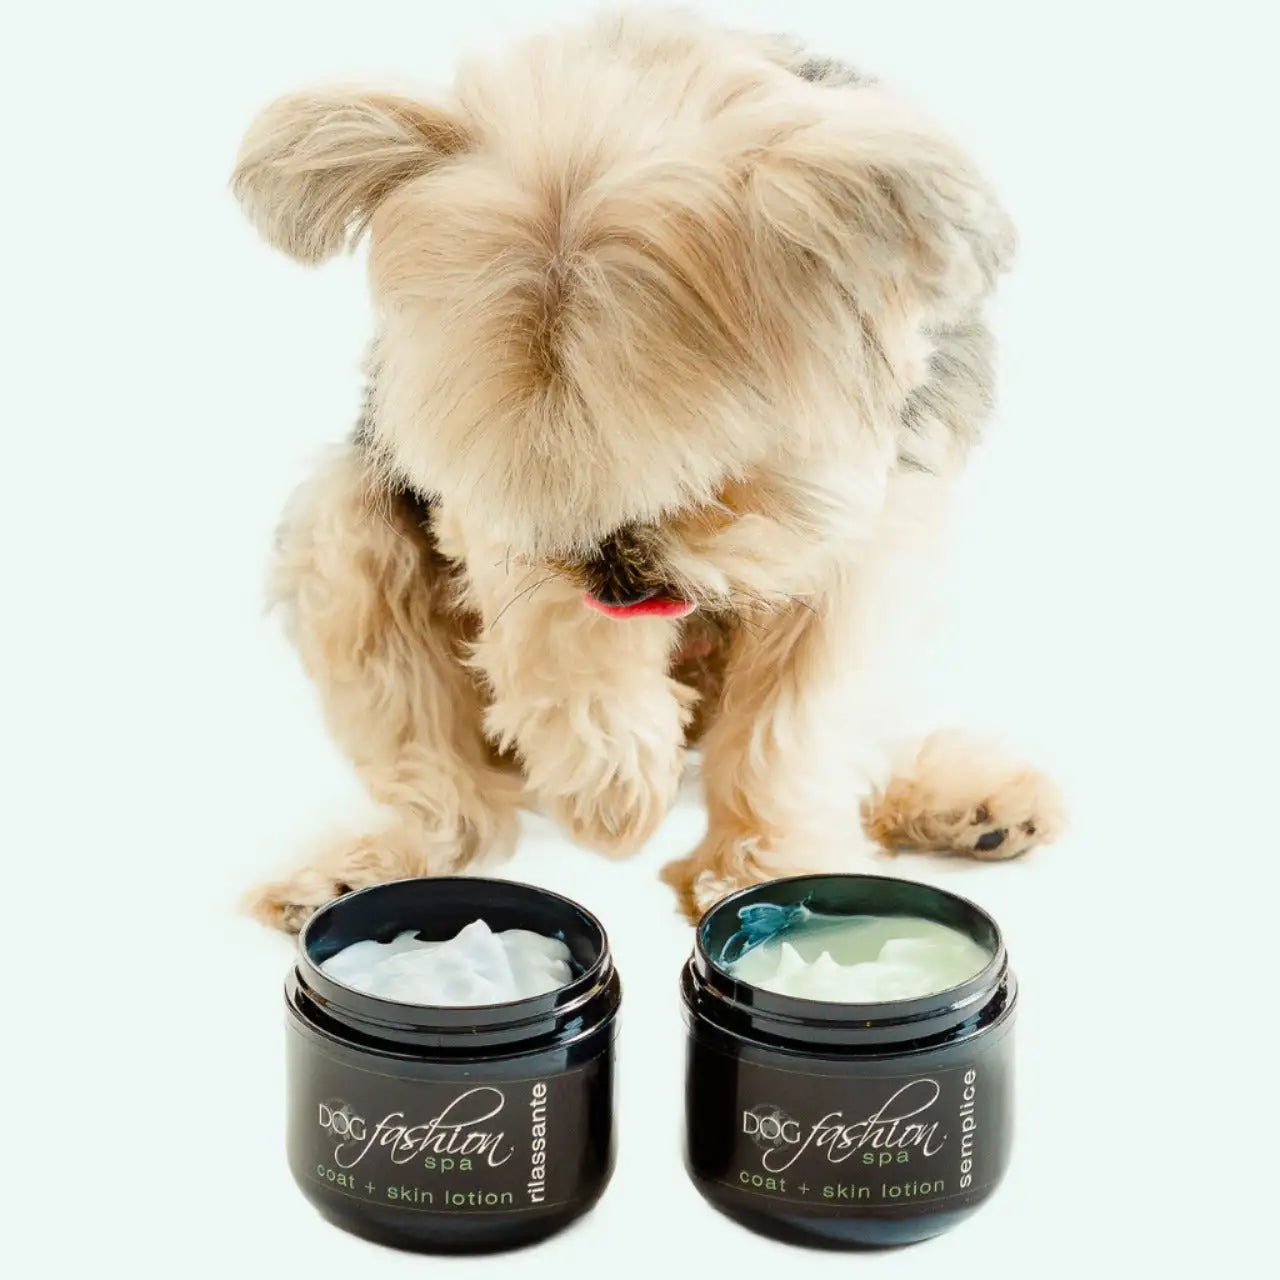 Dog Fashion Spa Best Leave-in Lotion from Dog Fashion Spa